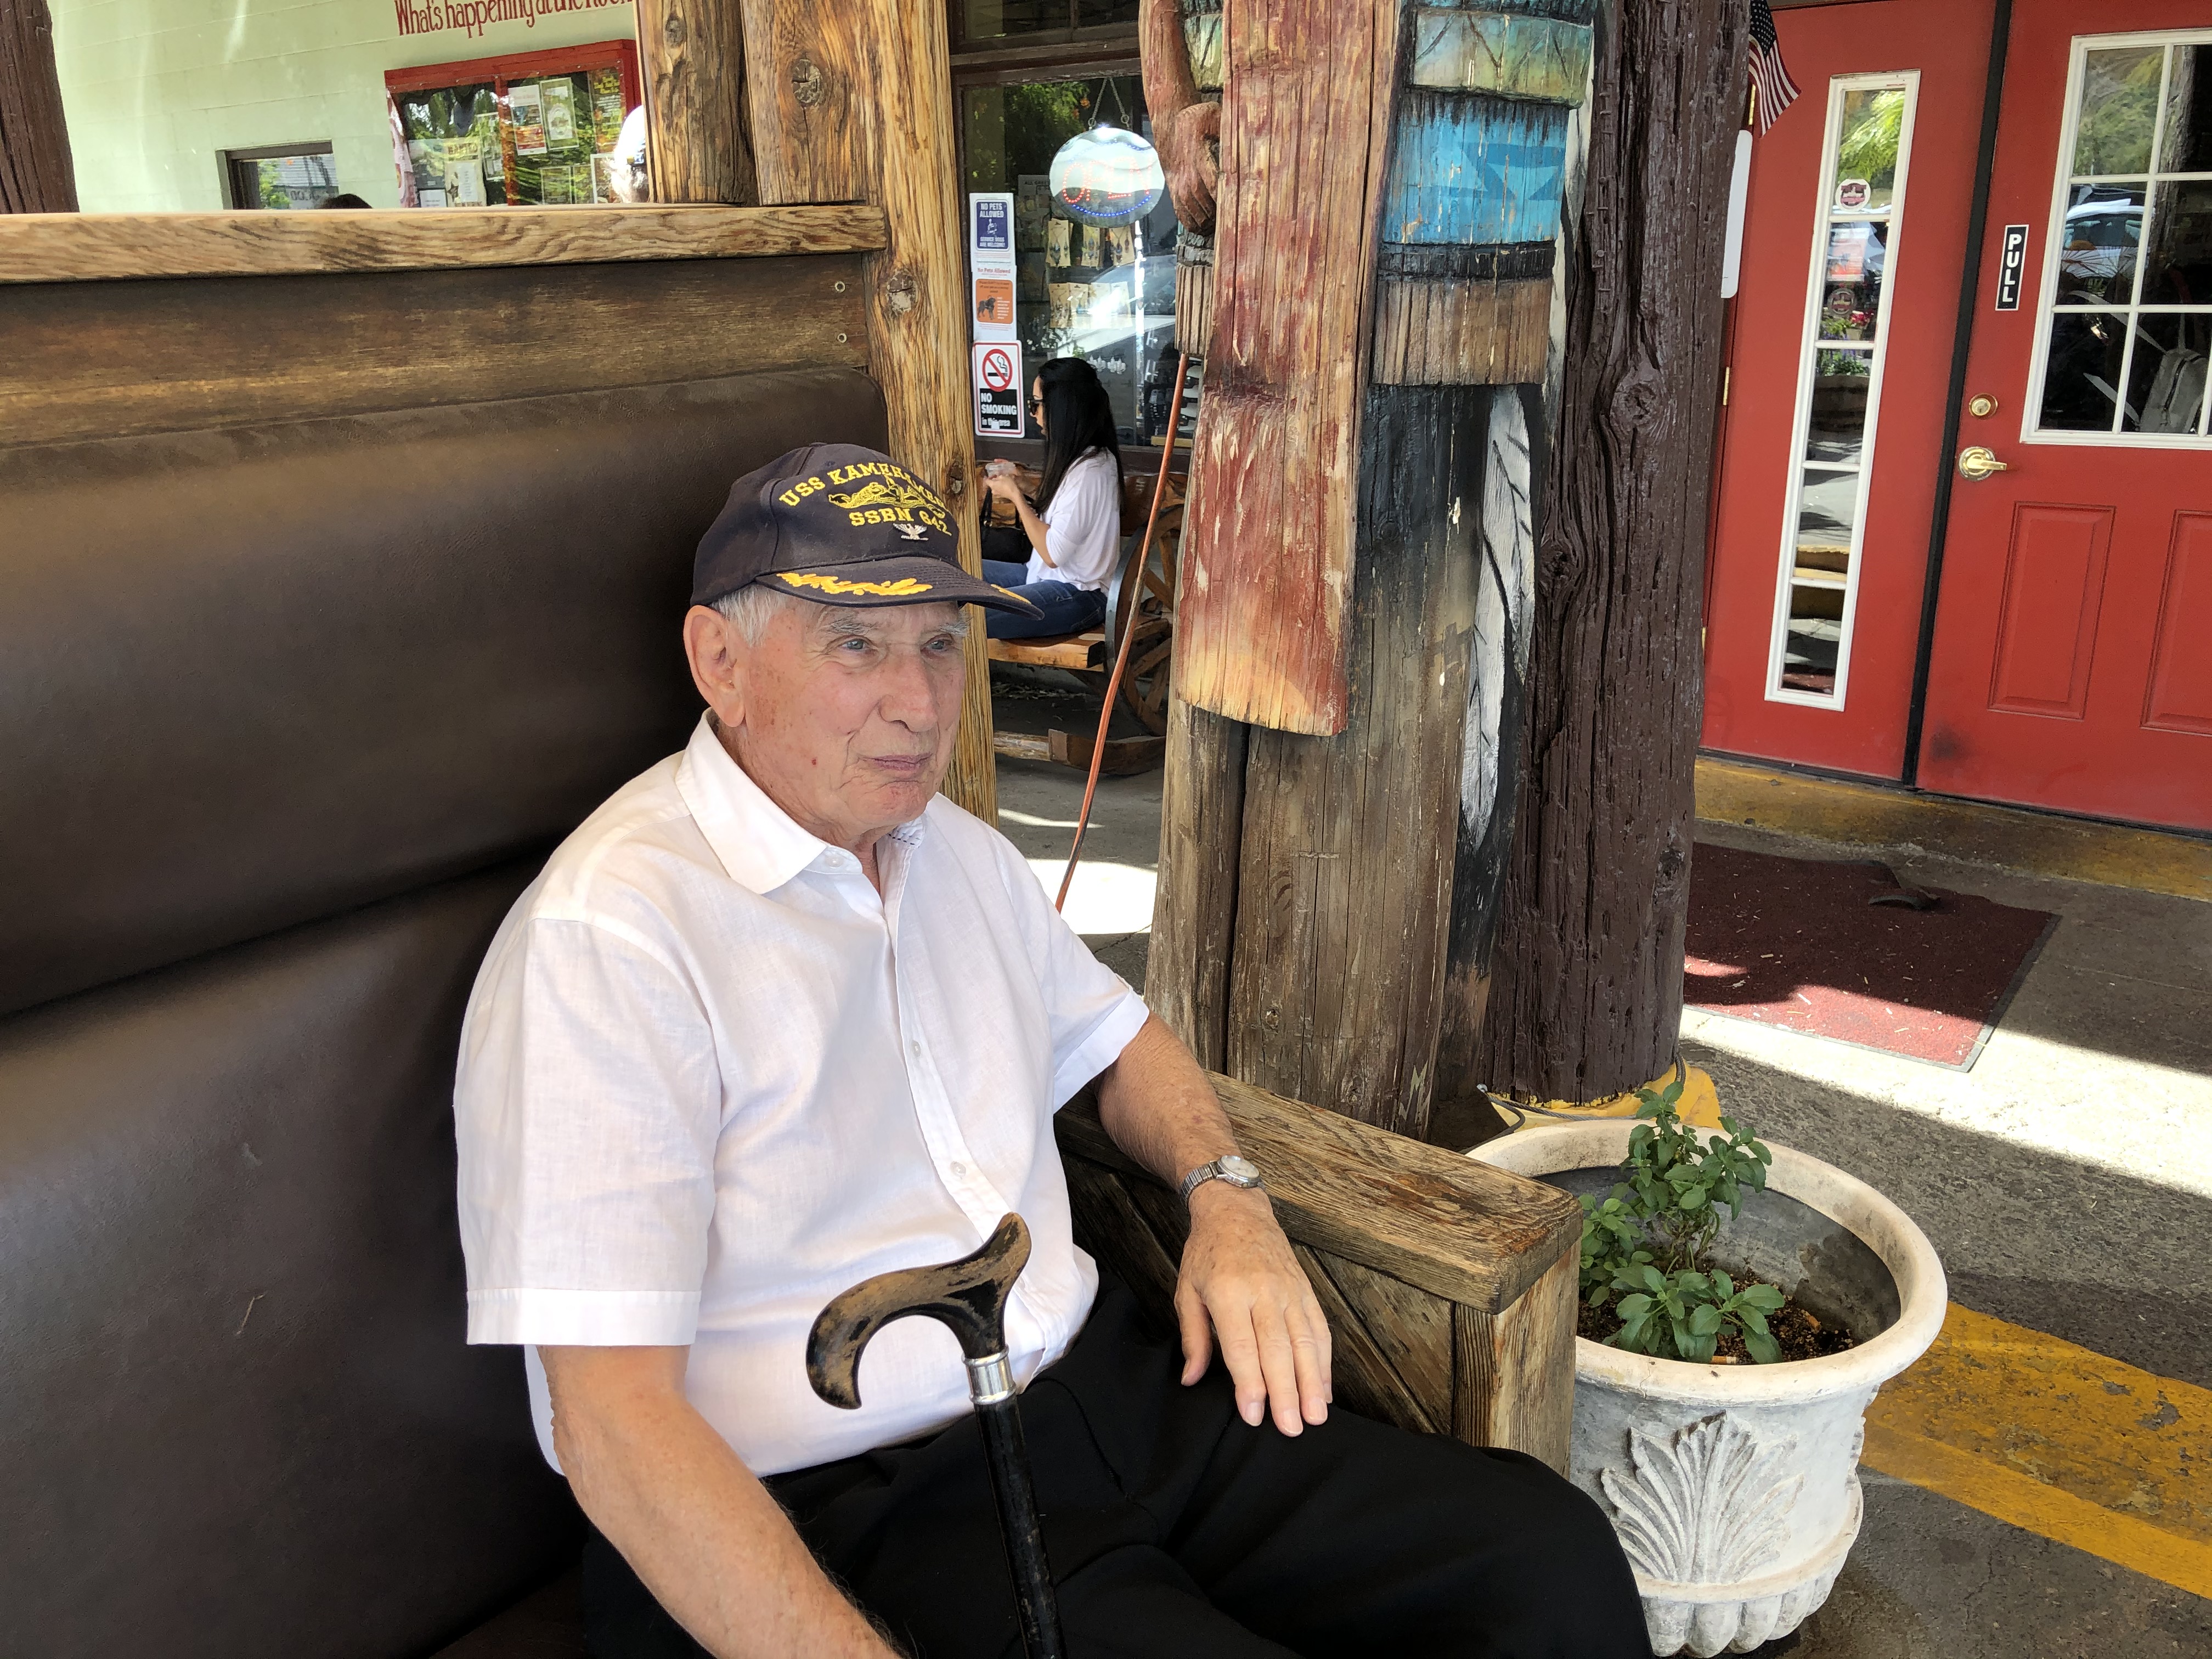 Capt. Dick Noreika at the Rock Springs Cafe between the Anthem & Black Canyon City Veterans' Parades, 11/9/19.